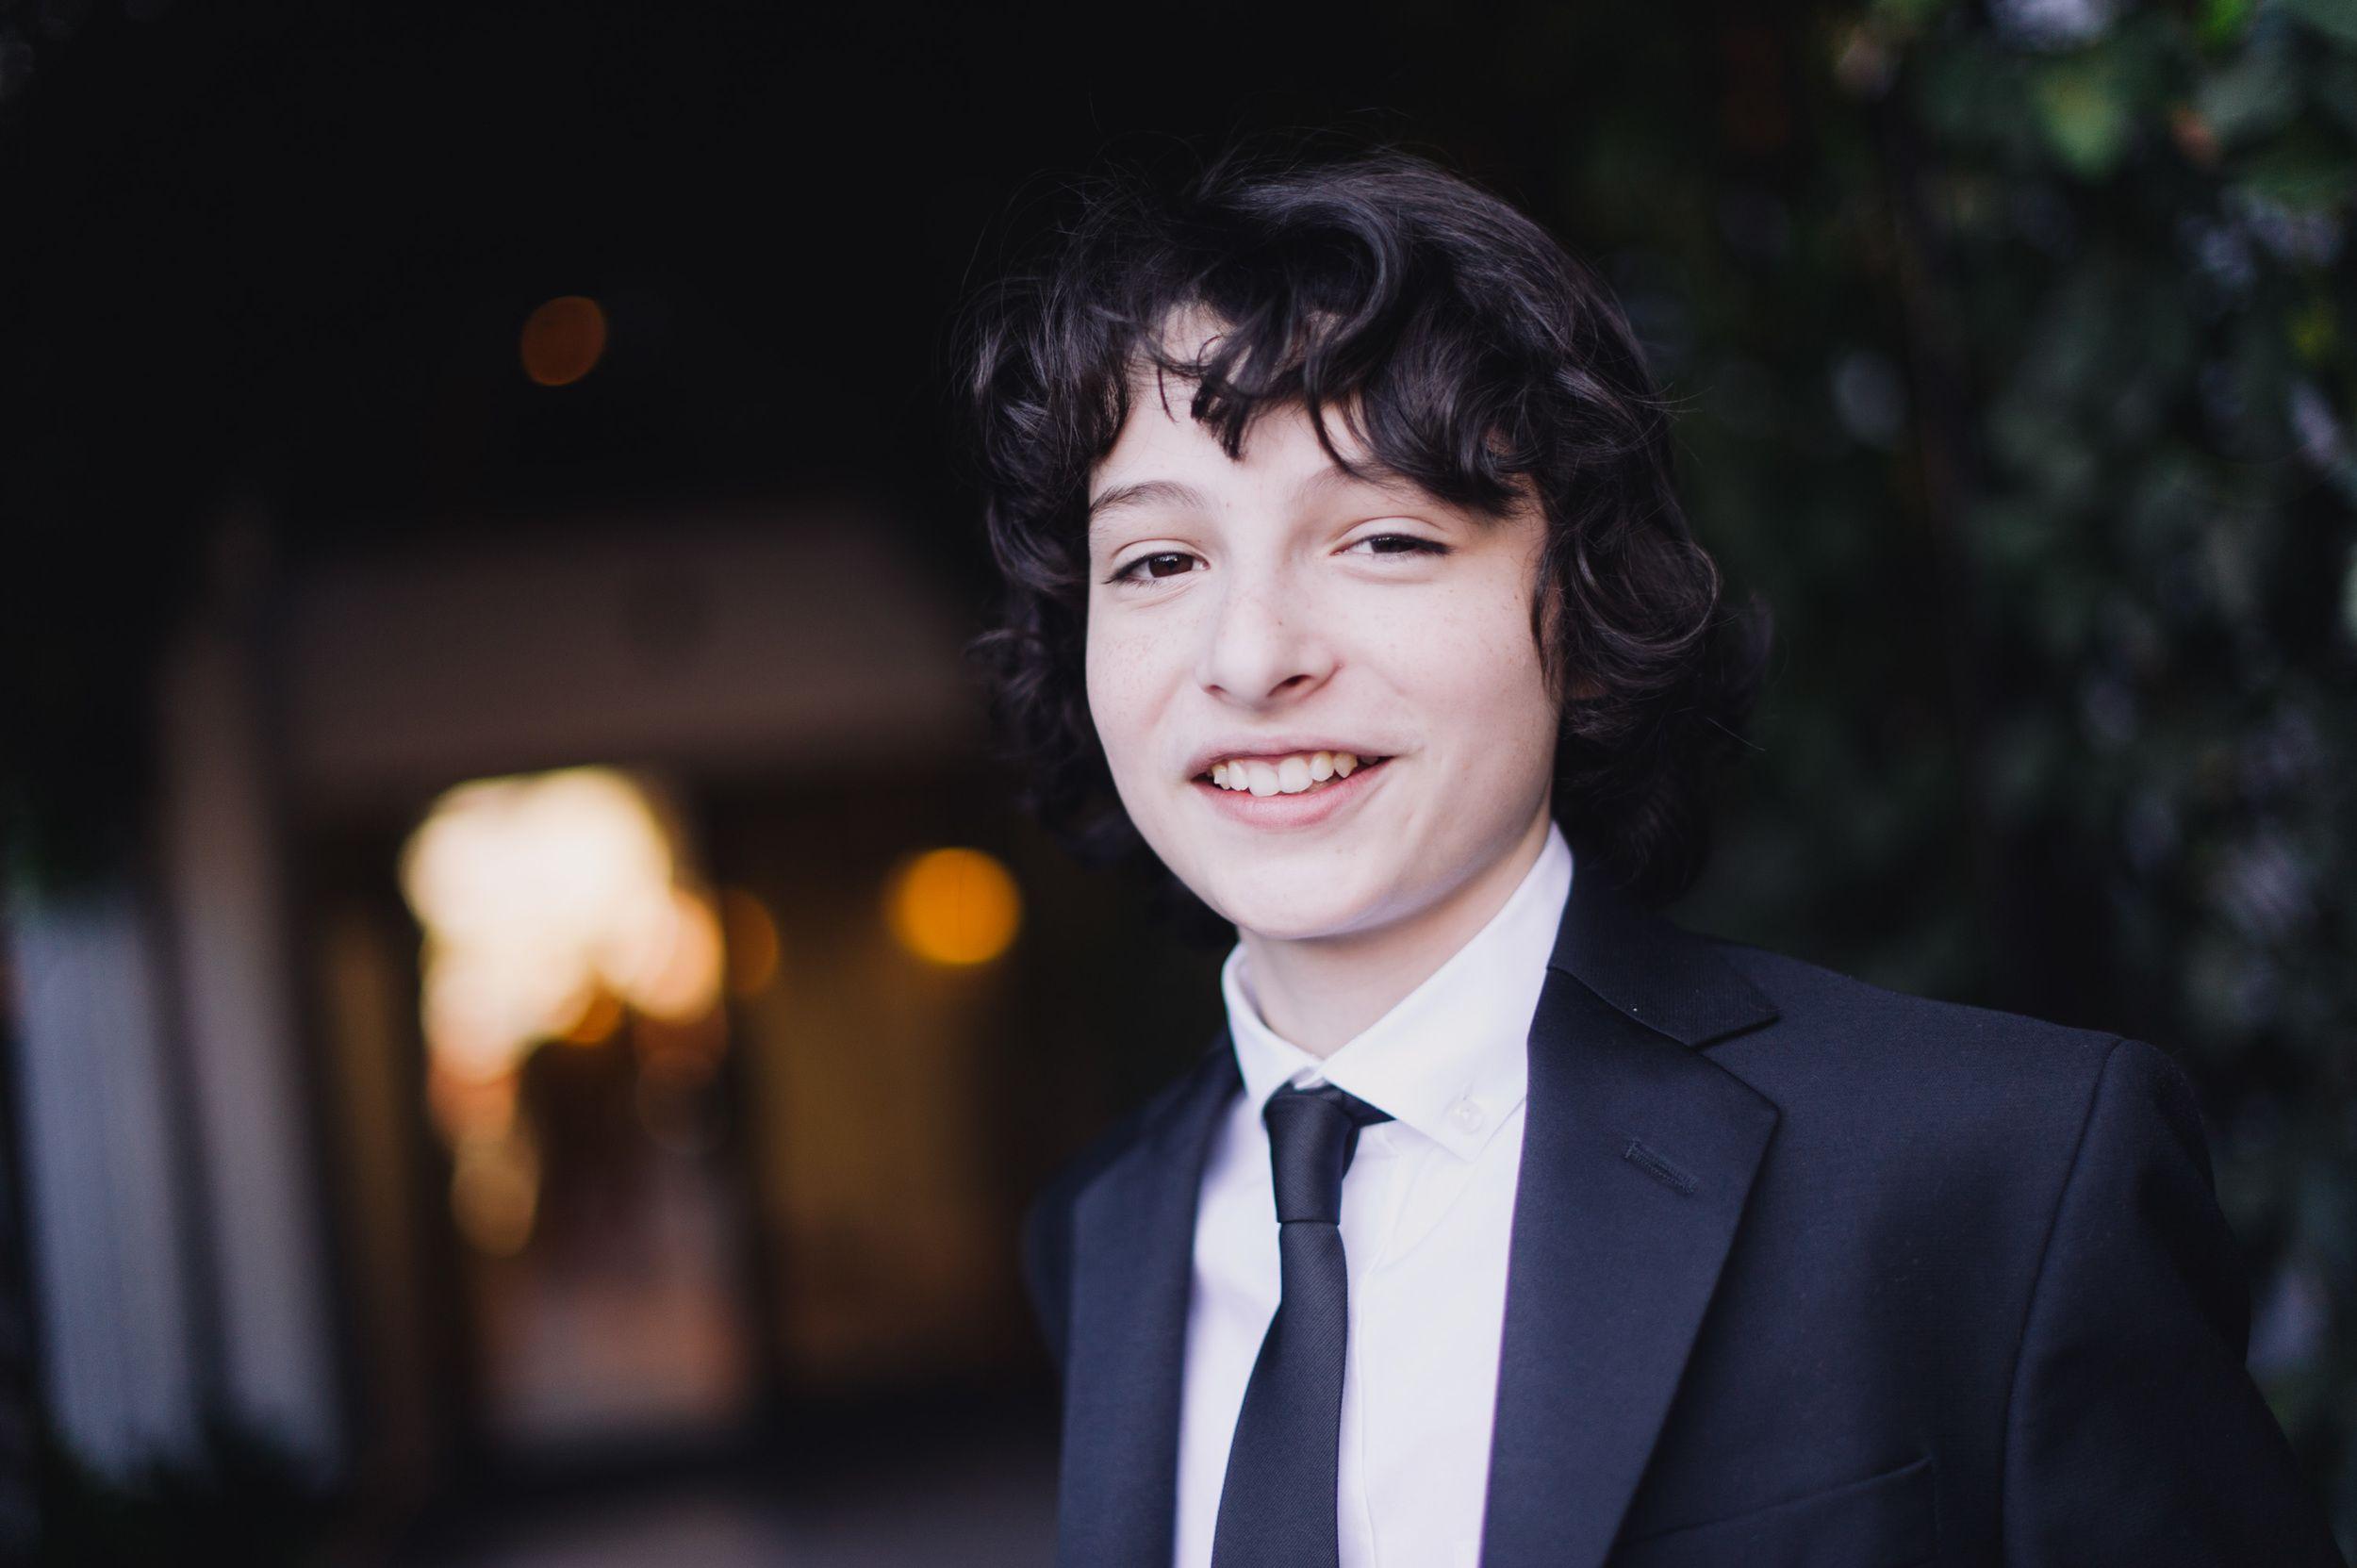 Things You (Probably) Didn't Know About 'It' Star Finn Wolfhard